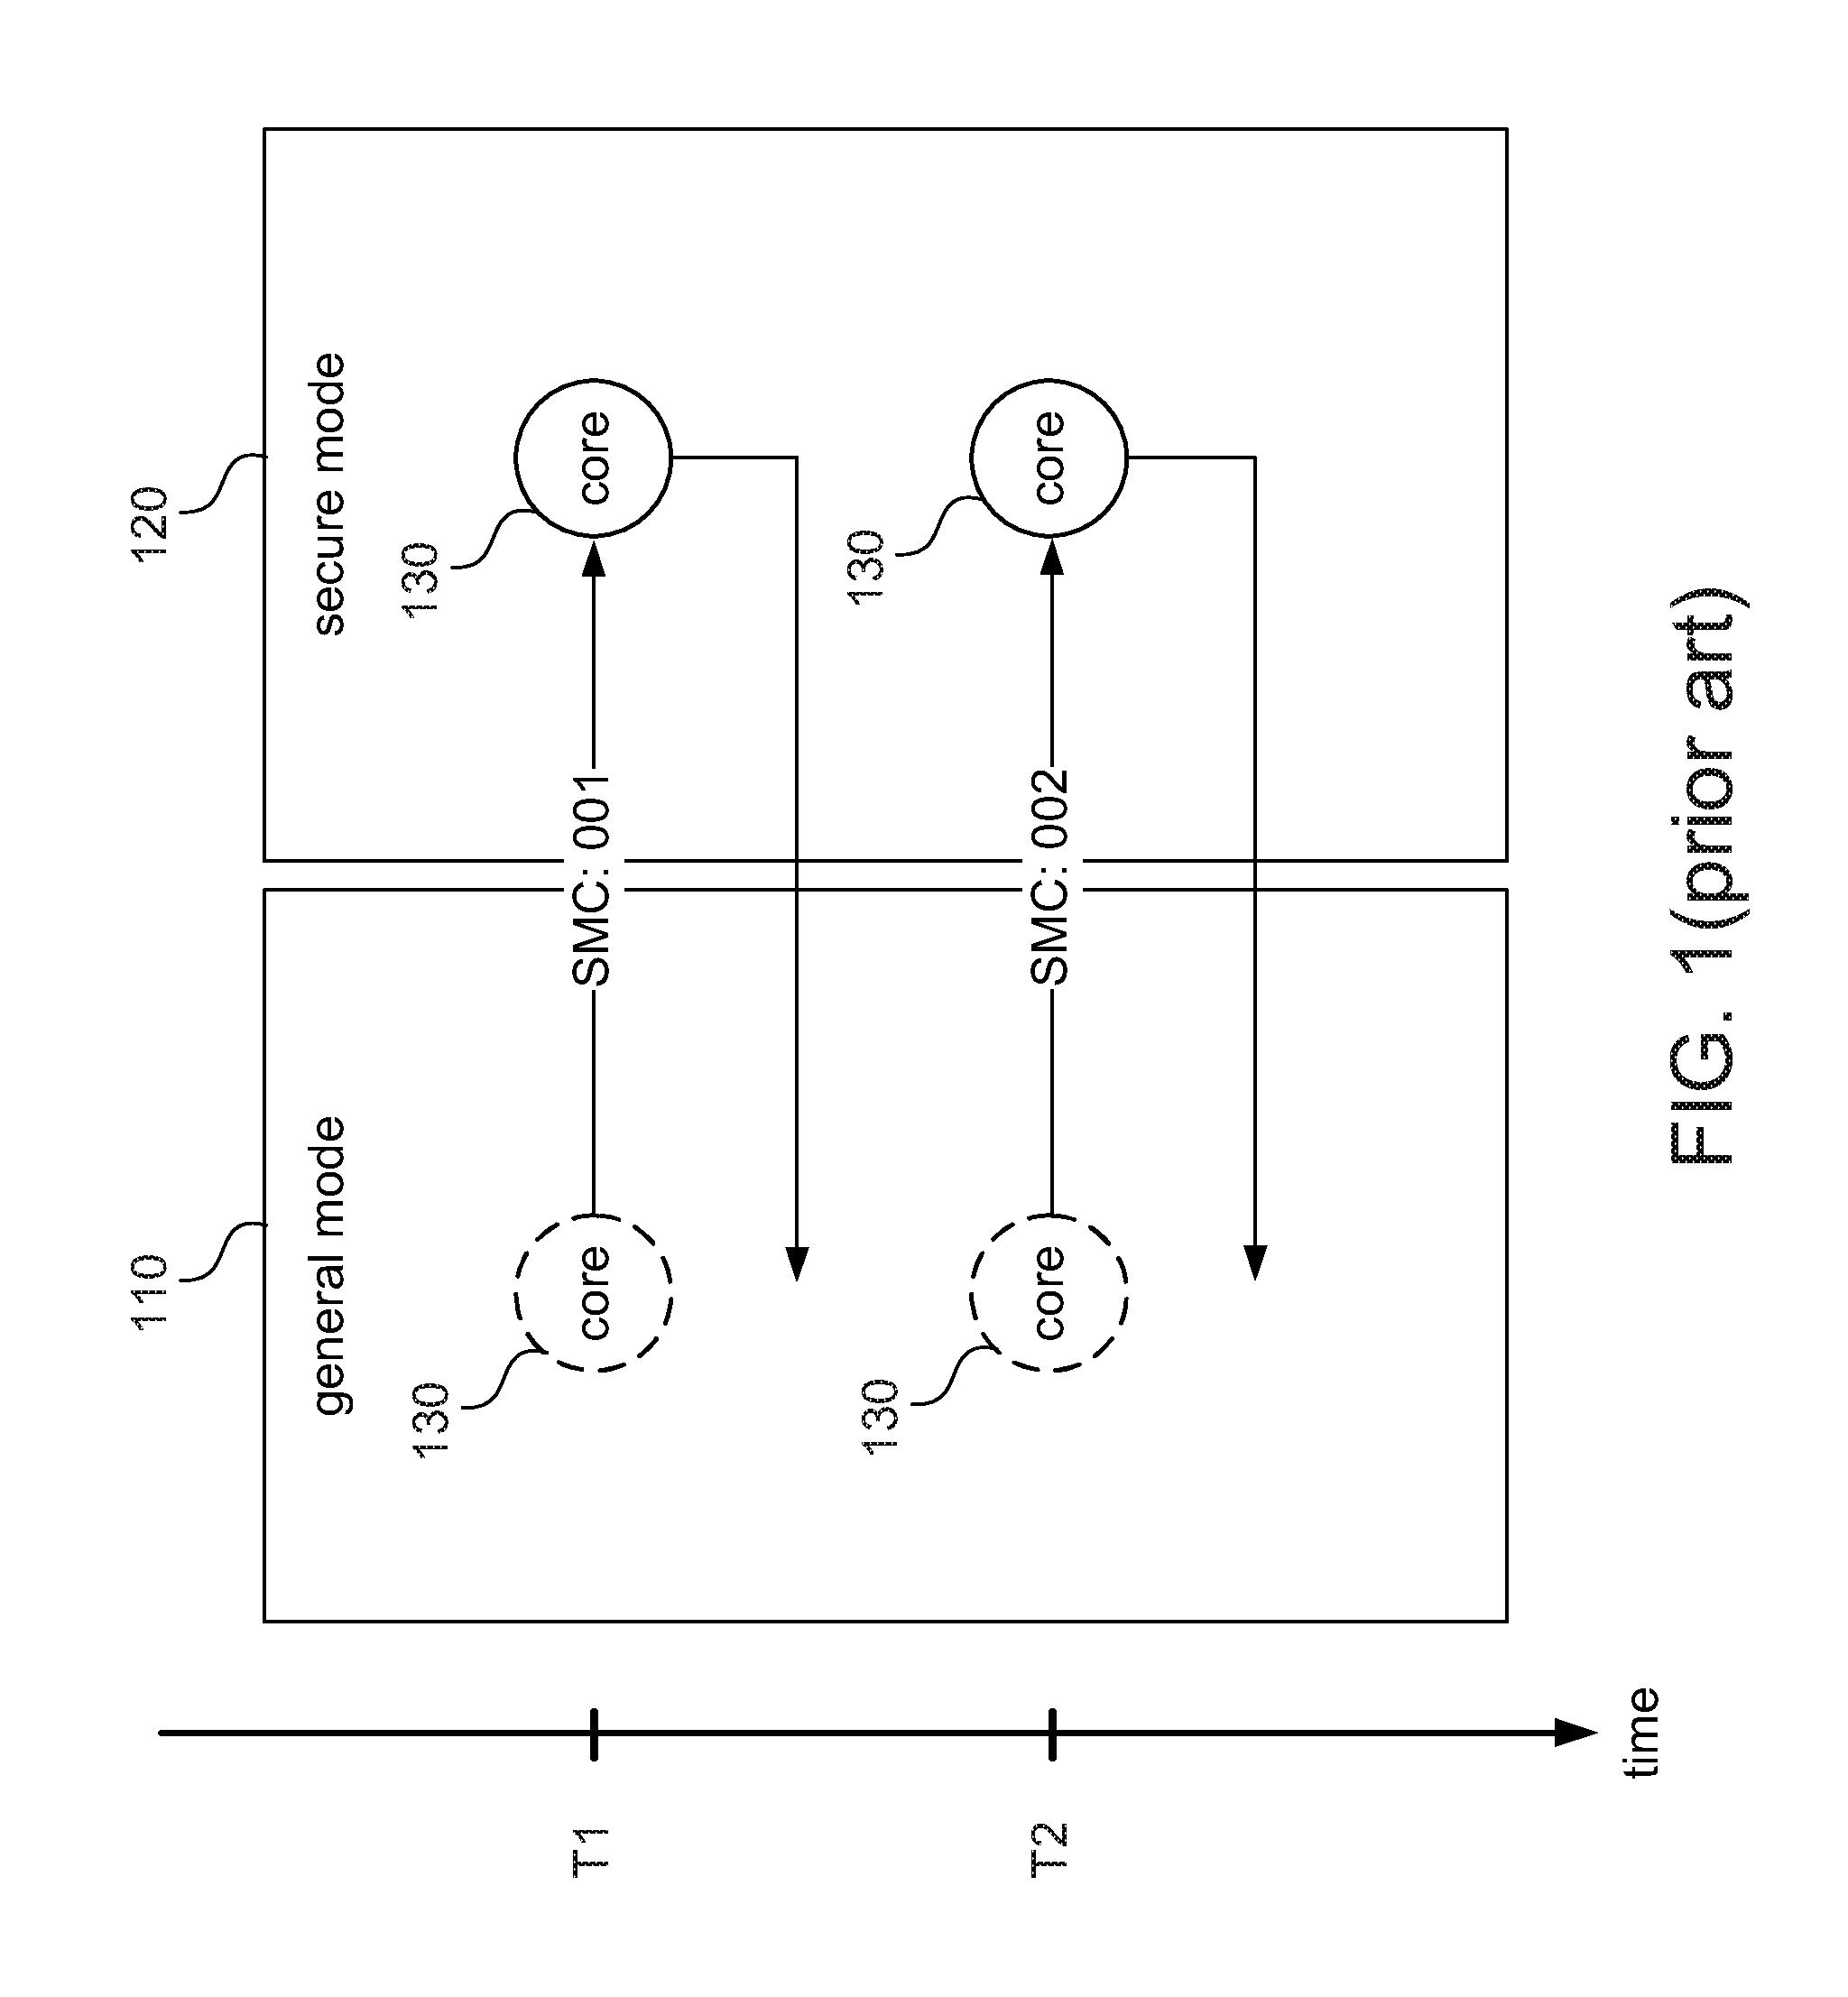 Computing device and method of processing secure services for computing device